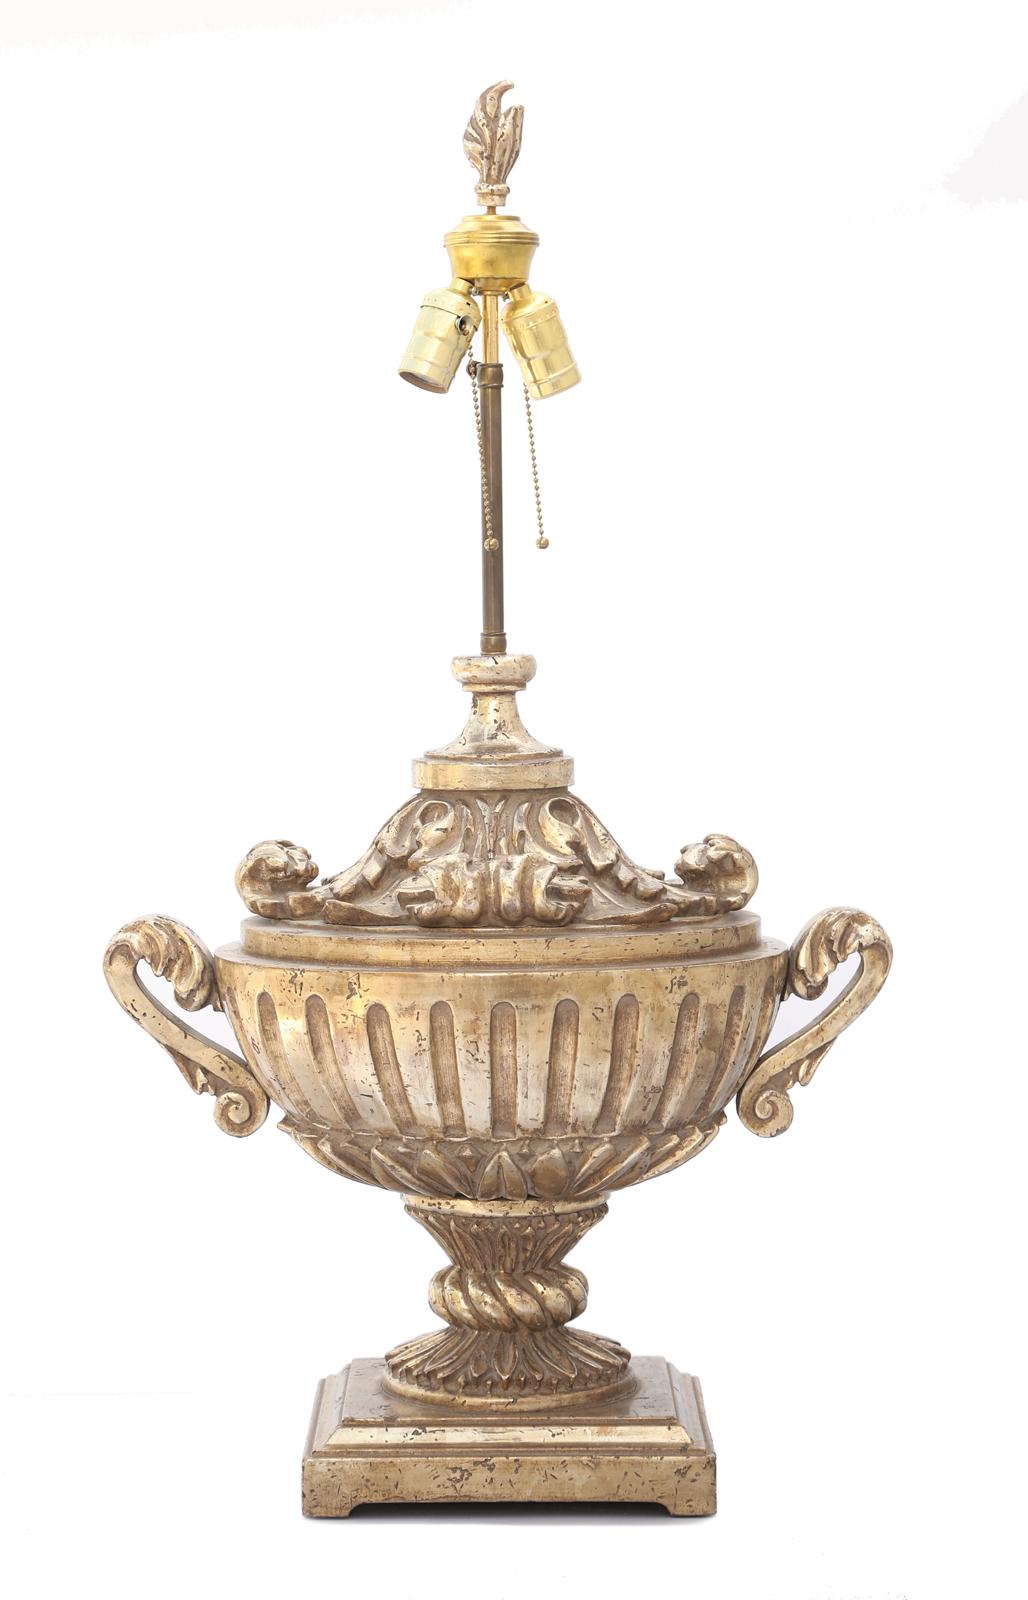 Single lamp, of silver giltwood, hand-carved into a campana urn of sold wood; the ovoid, fluted body flanked by S-scroll handles, seated on a foliate cup, its hourglass neck wrapped with a large carved braid, to its graduated, square plinth, capped